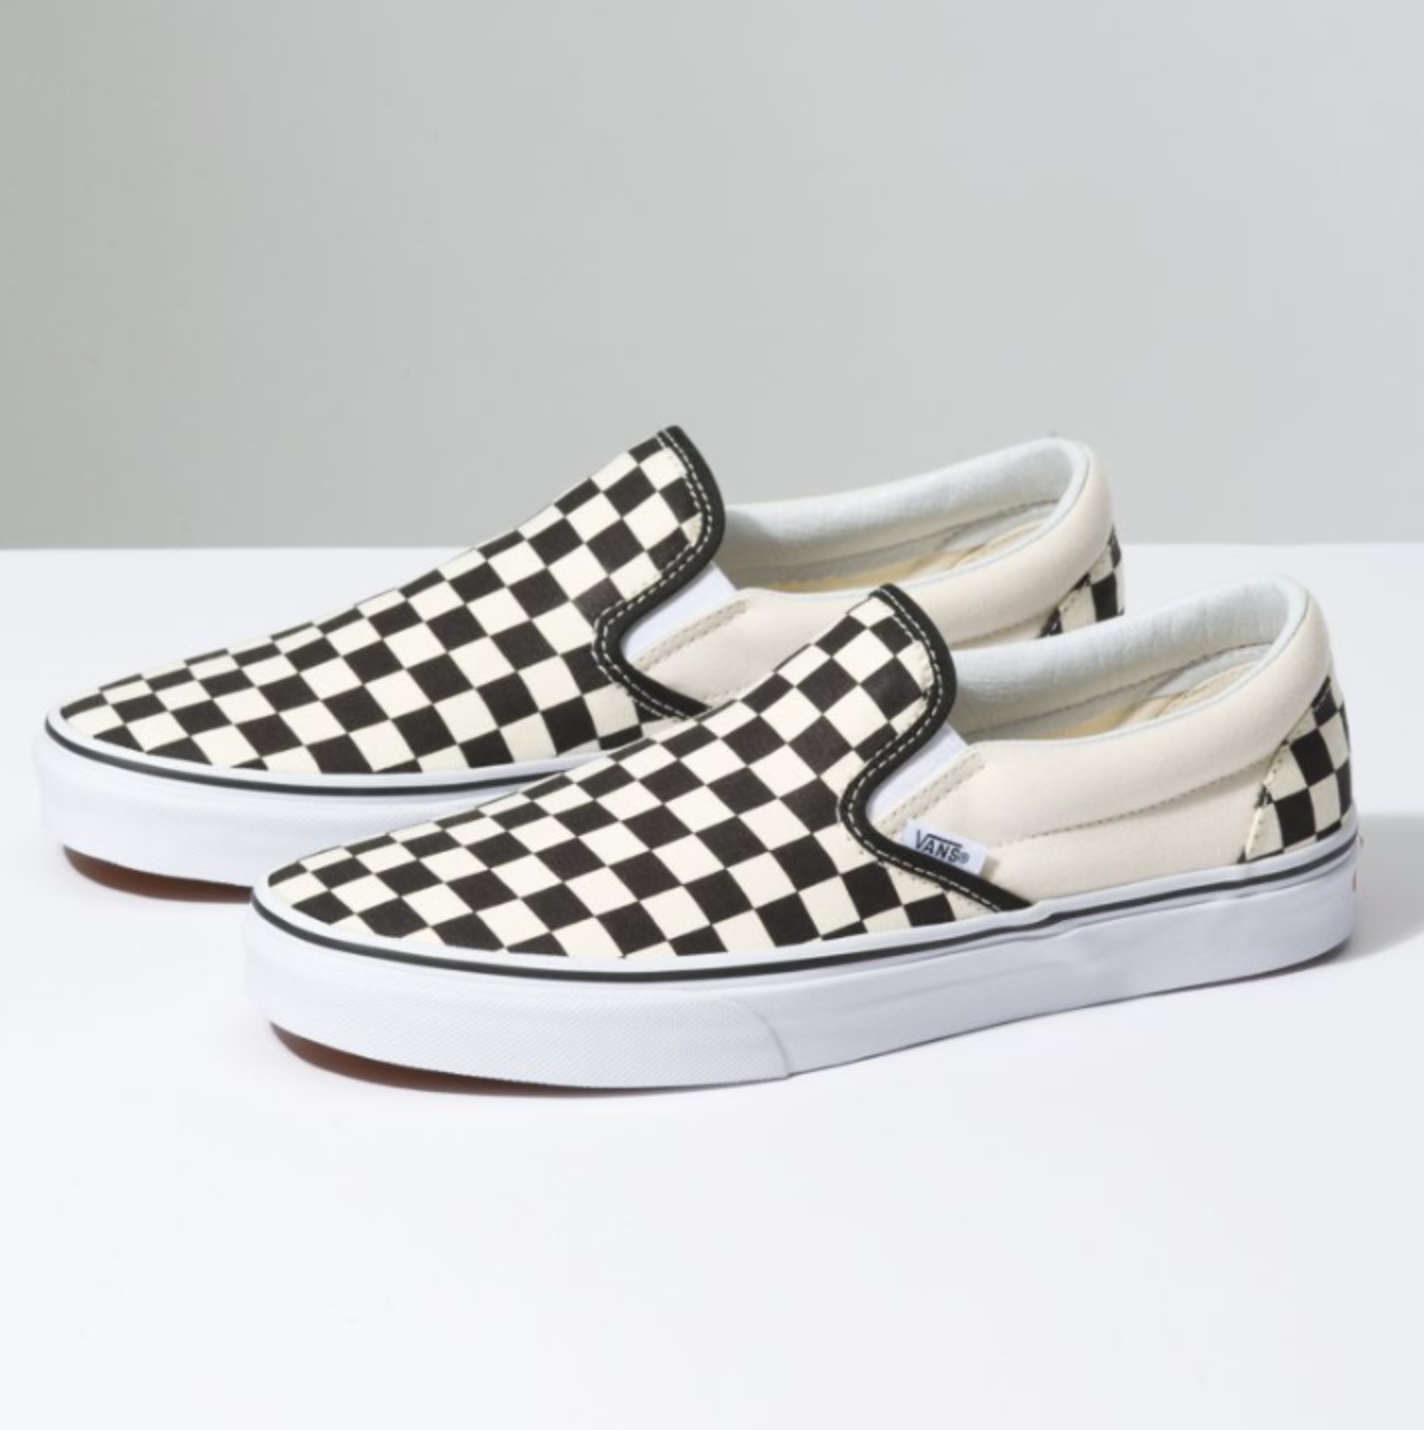 checkered shoes for girls